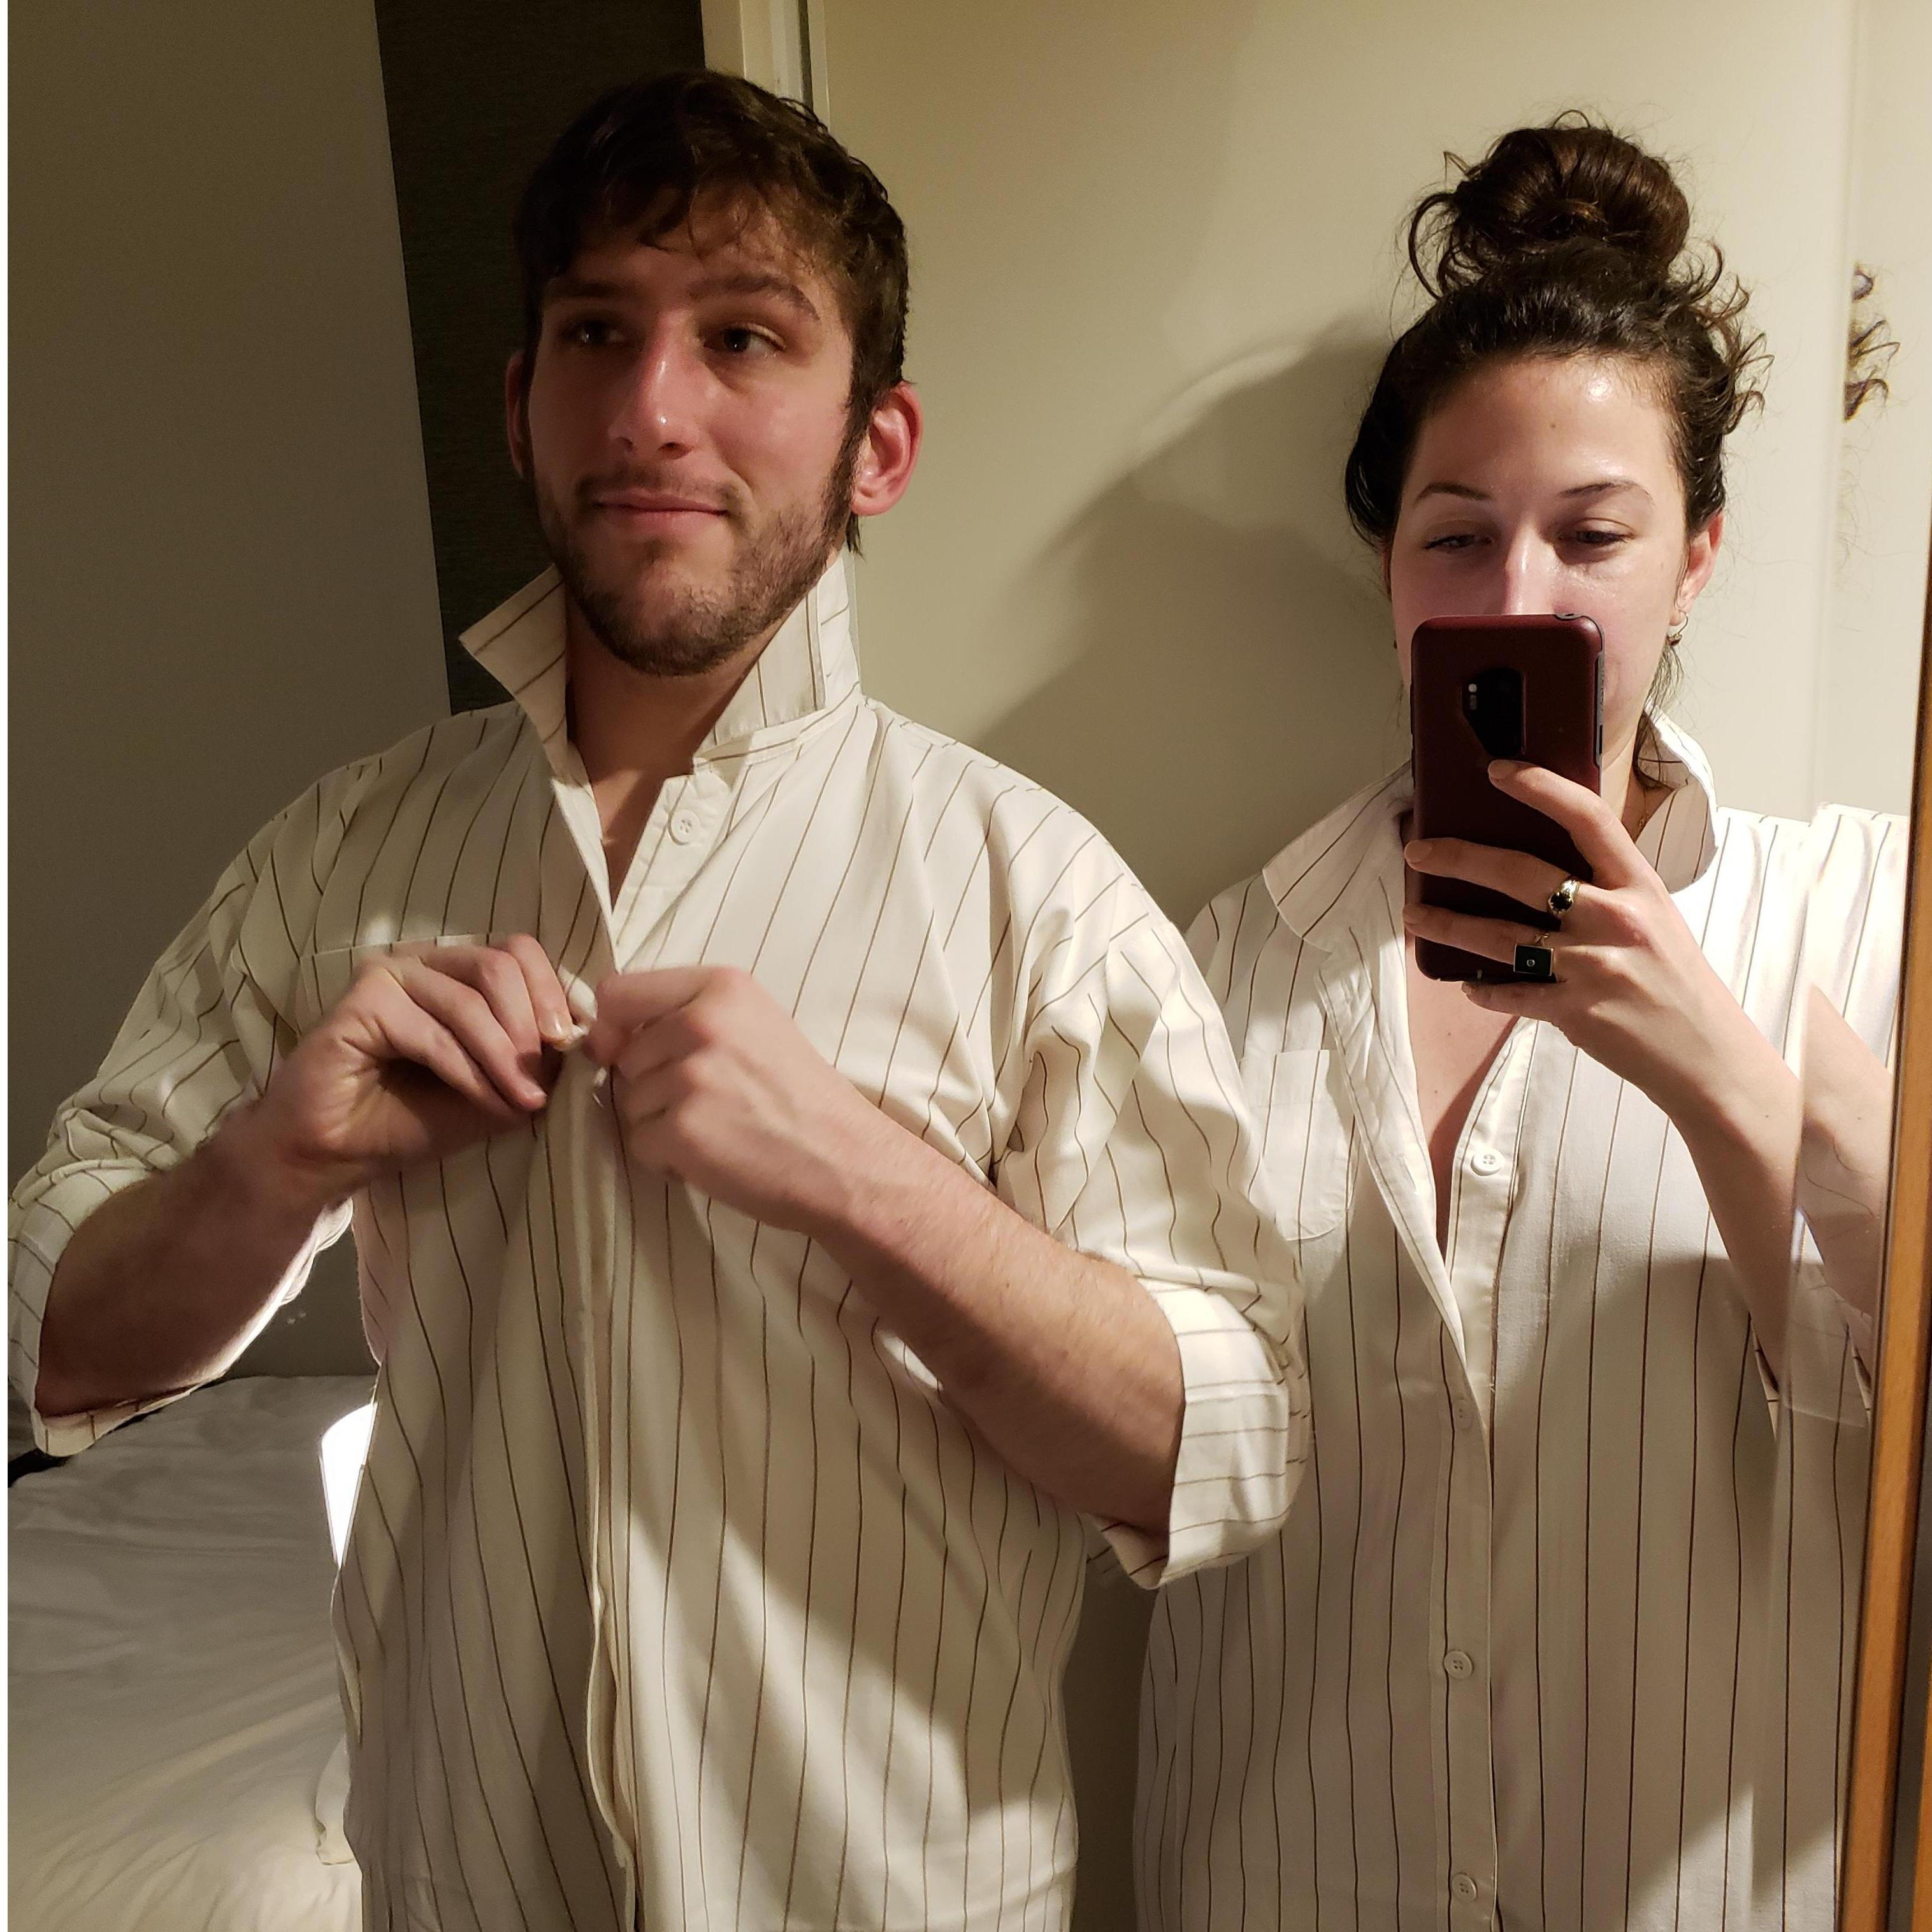 Matching nightshirts provided by our hotel in Tokyo